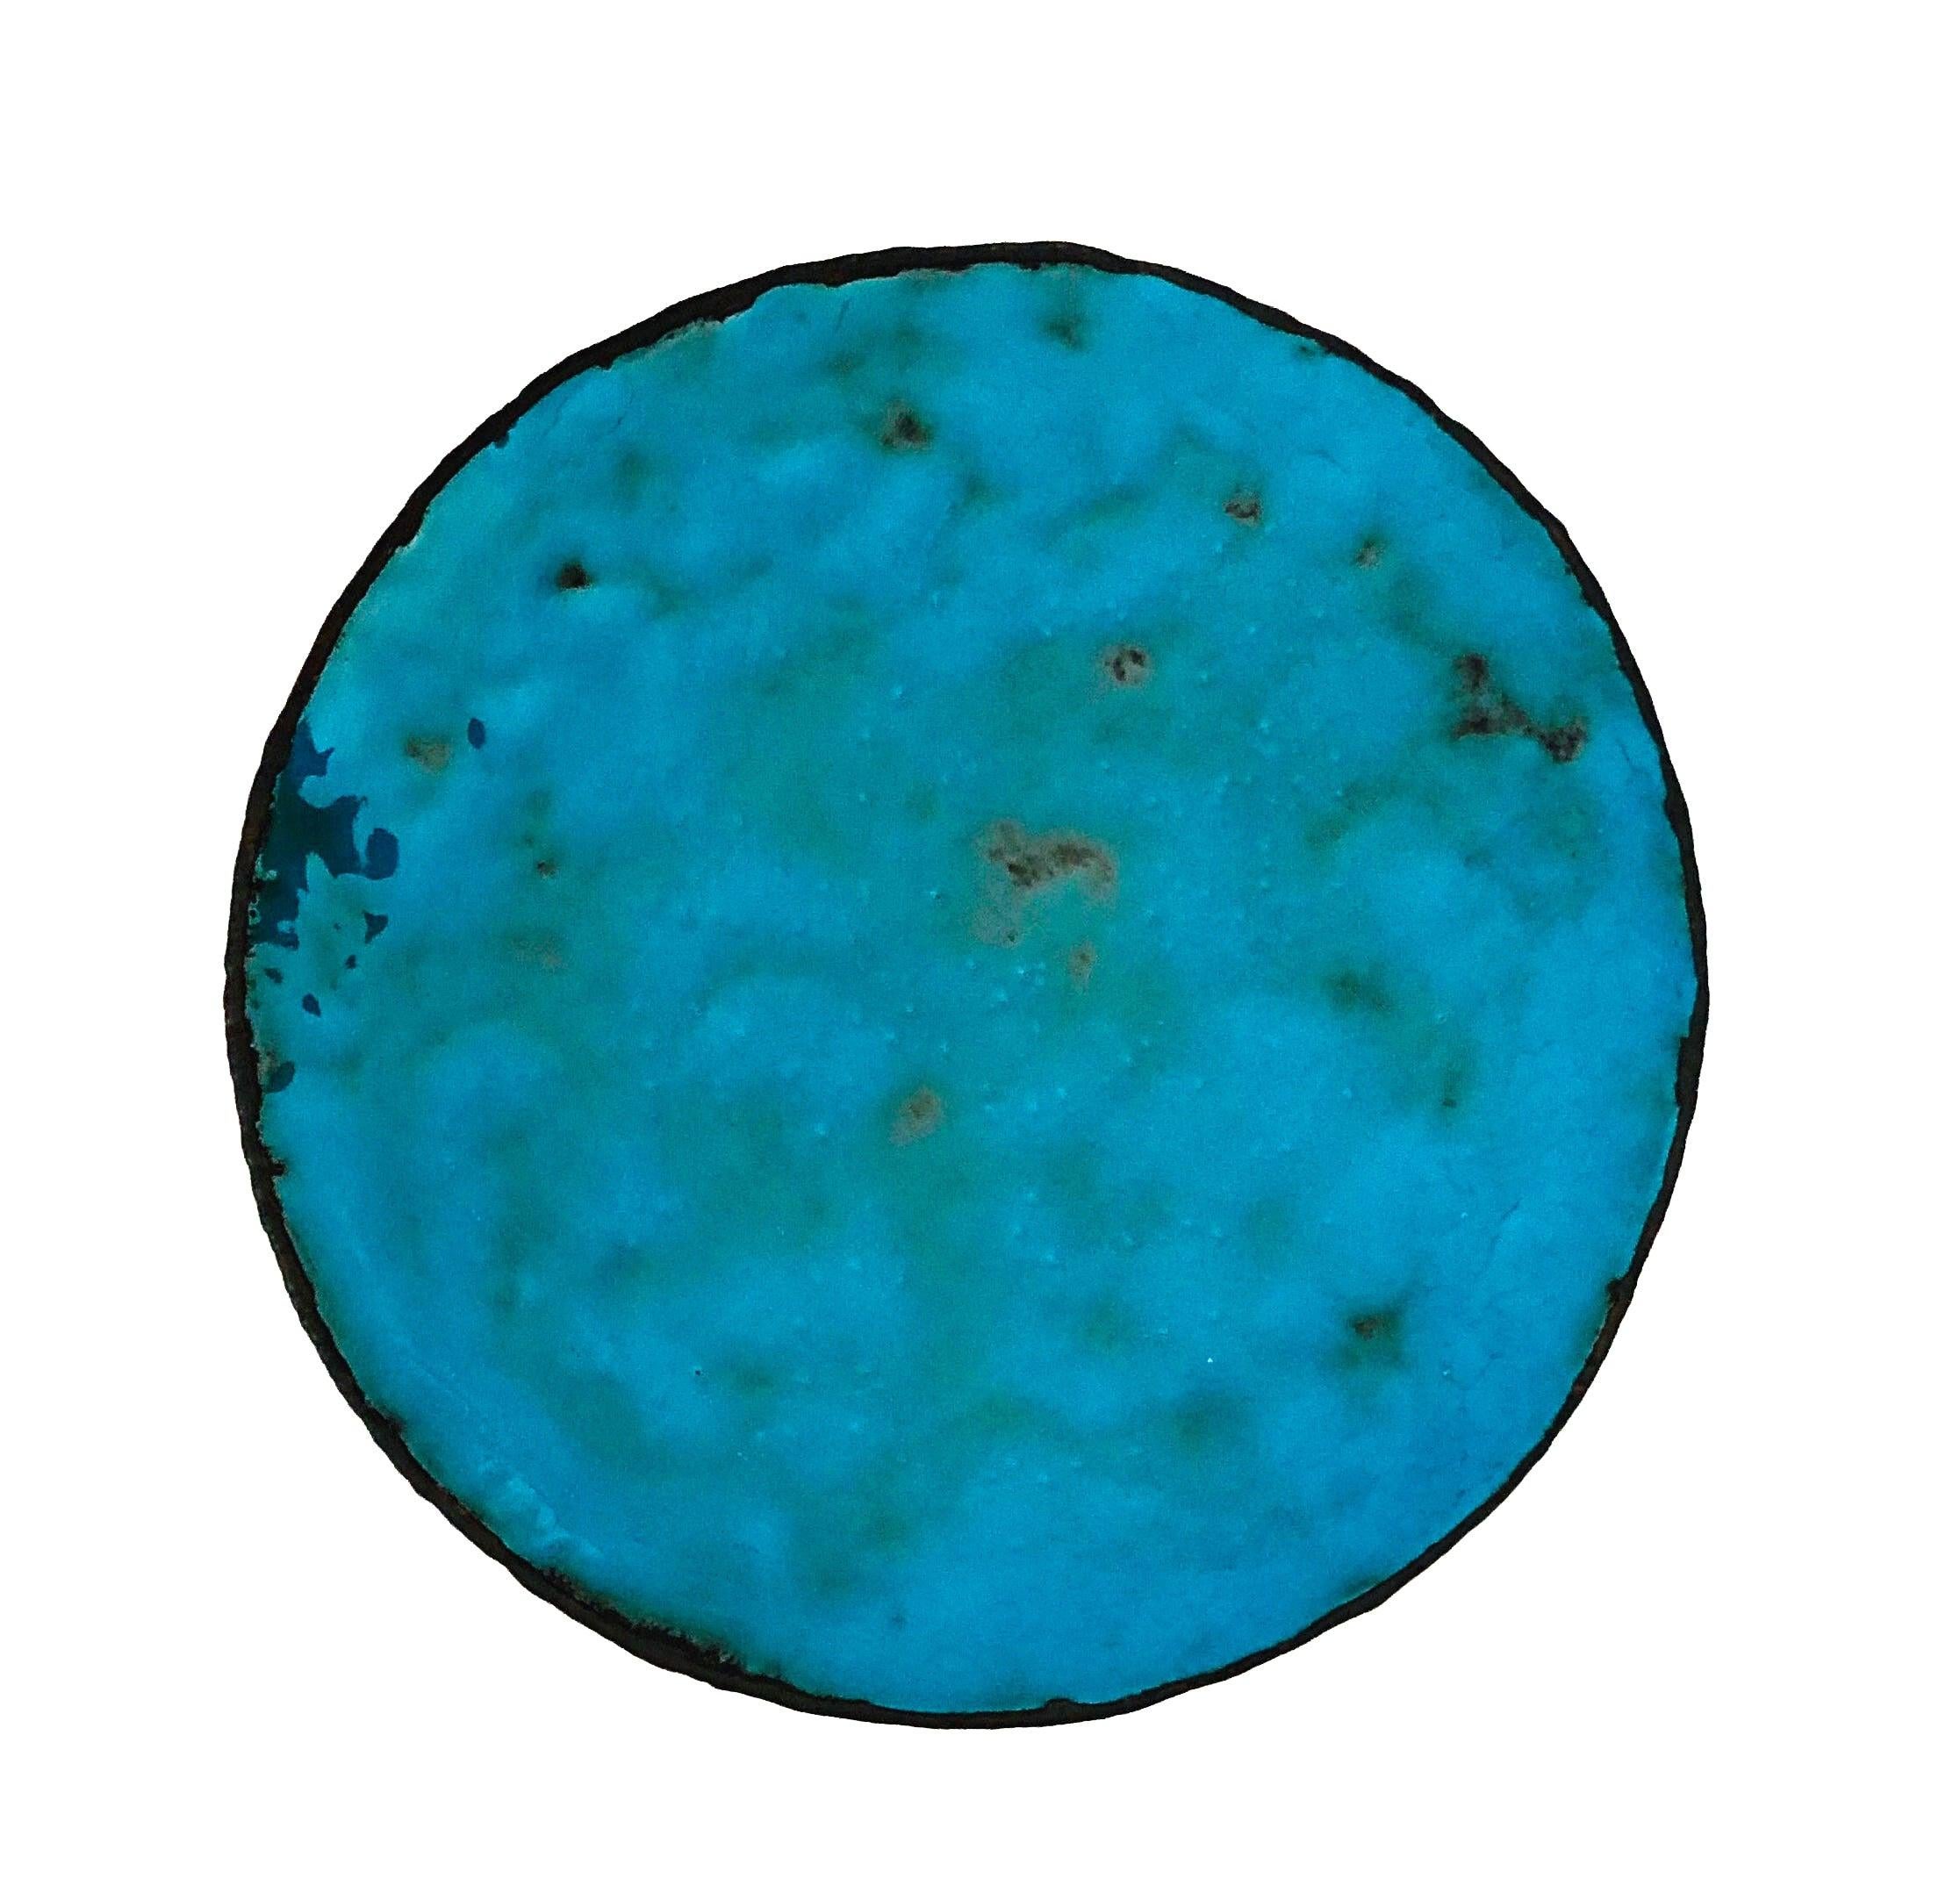 Skin - Contemporary, 21st C., Enamel on Copper, Circular, Turquoise - Mixed Media Art by Kwangho Lee